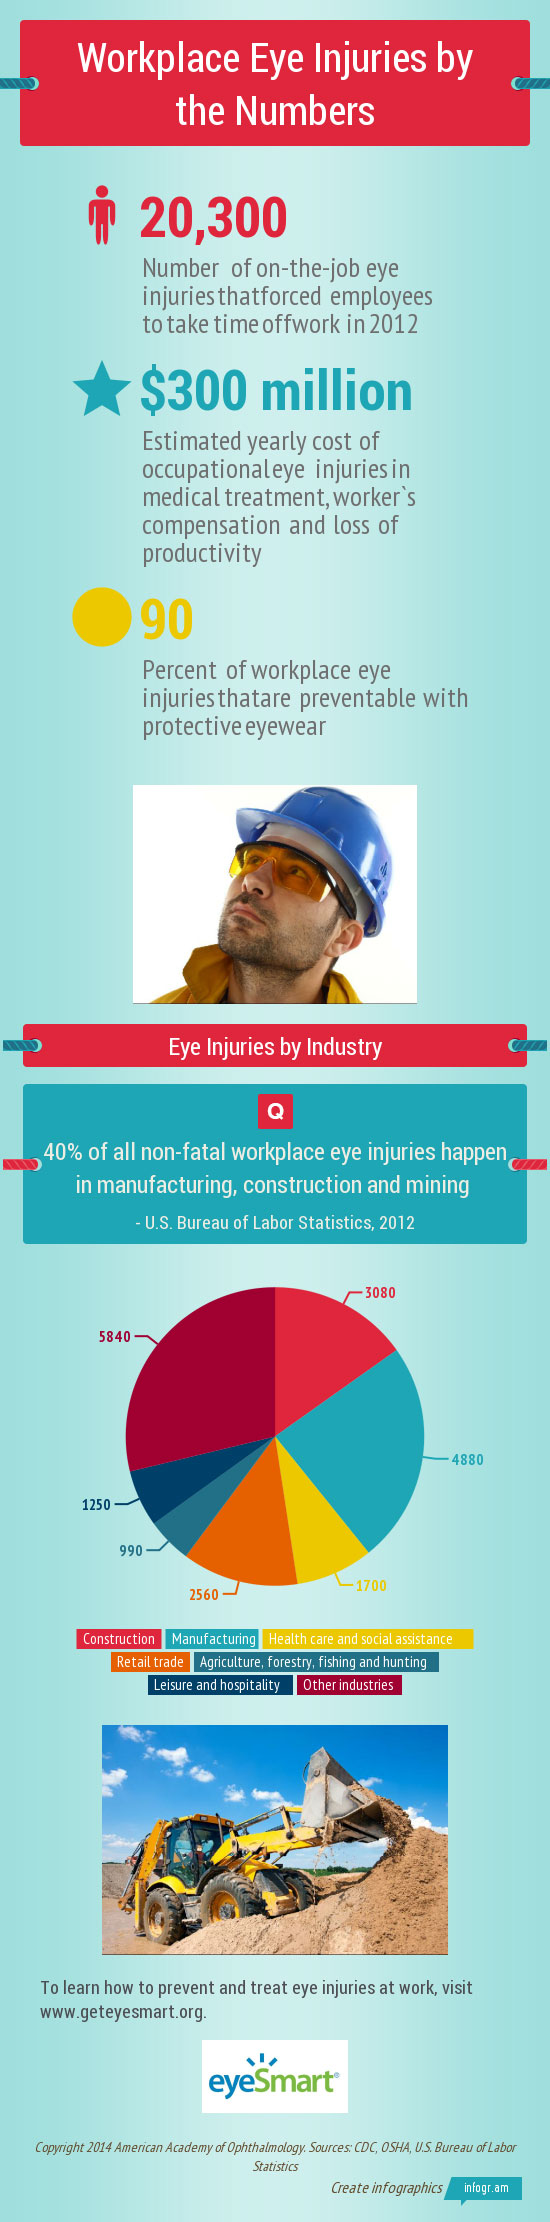 Workplace-Eye-Injuries-March-2014-550px